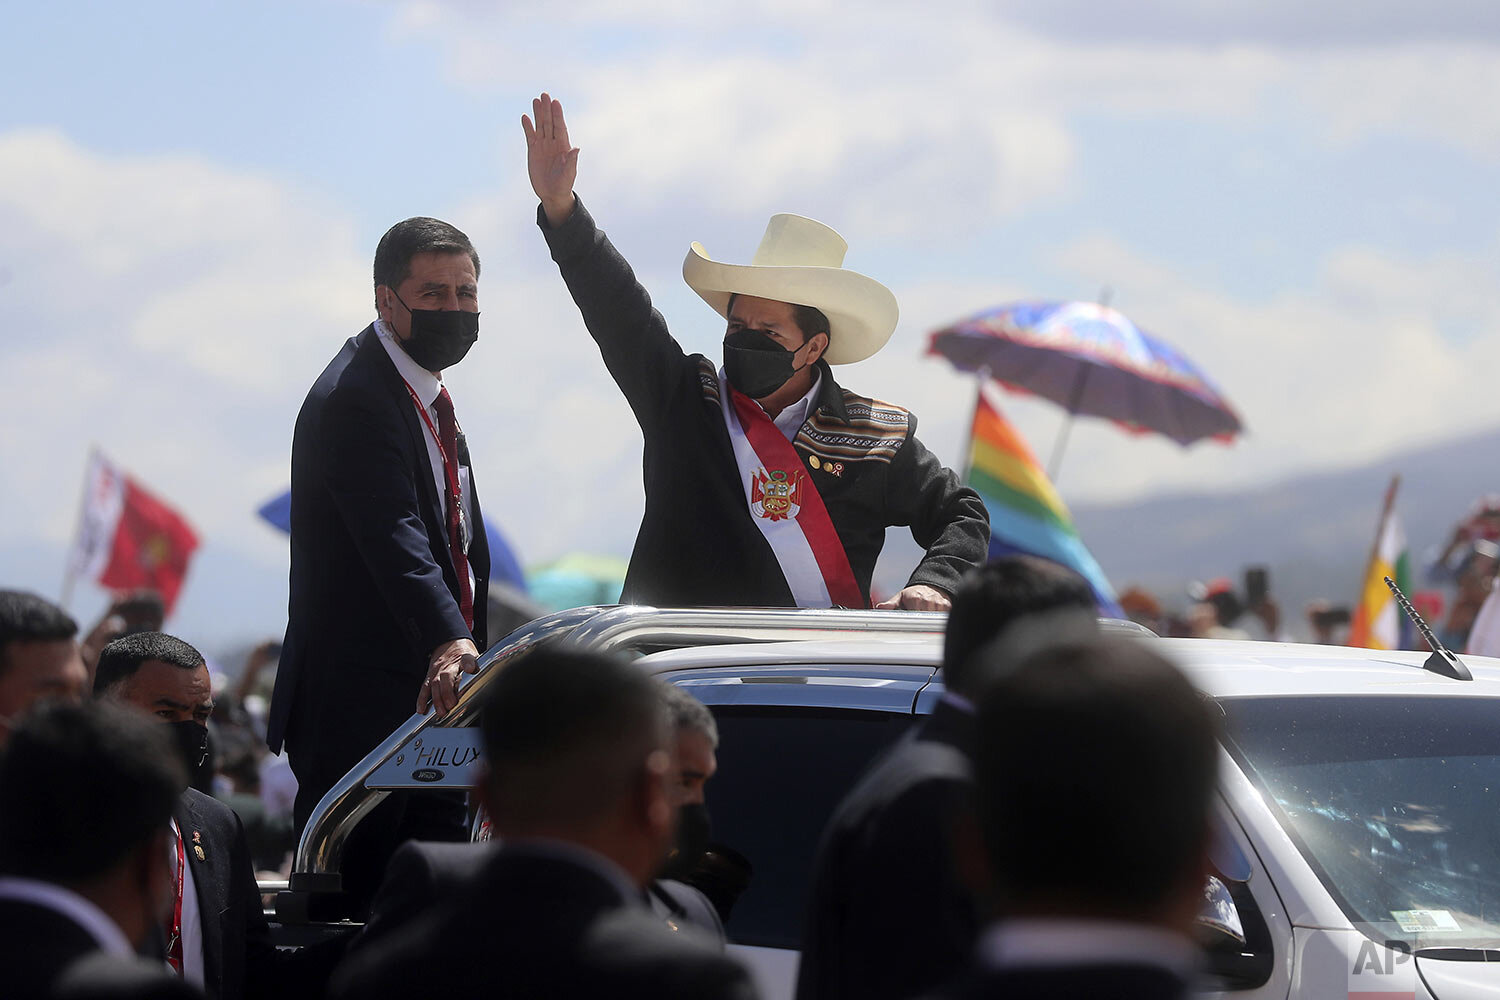  Peruvian President Pedro Castillo arrives to a symbolic swearing-in ceremony at the site of the 1824 Battle of Ayacucho, which sealed independence from Spain, at the Pampa de la Quinua as part of Peru´s bicentennial celebrations in Ayacucho, Peru, T